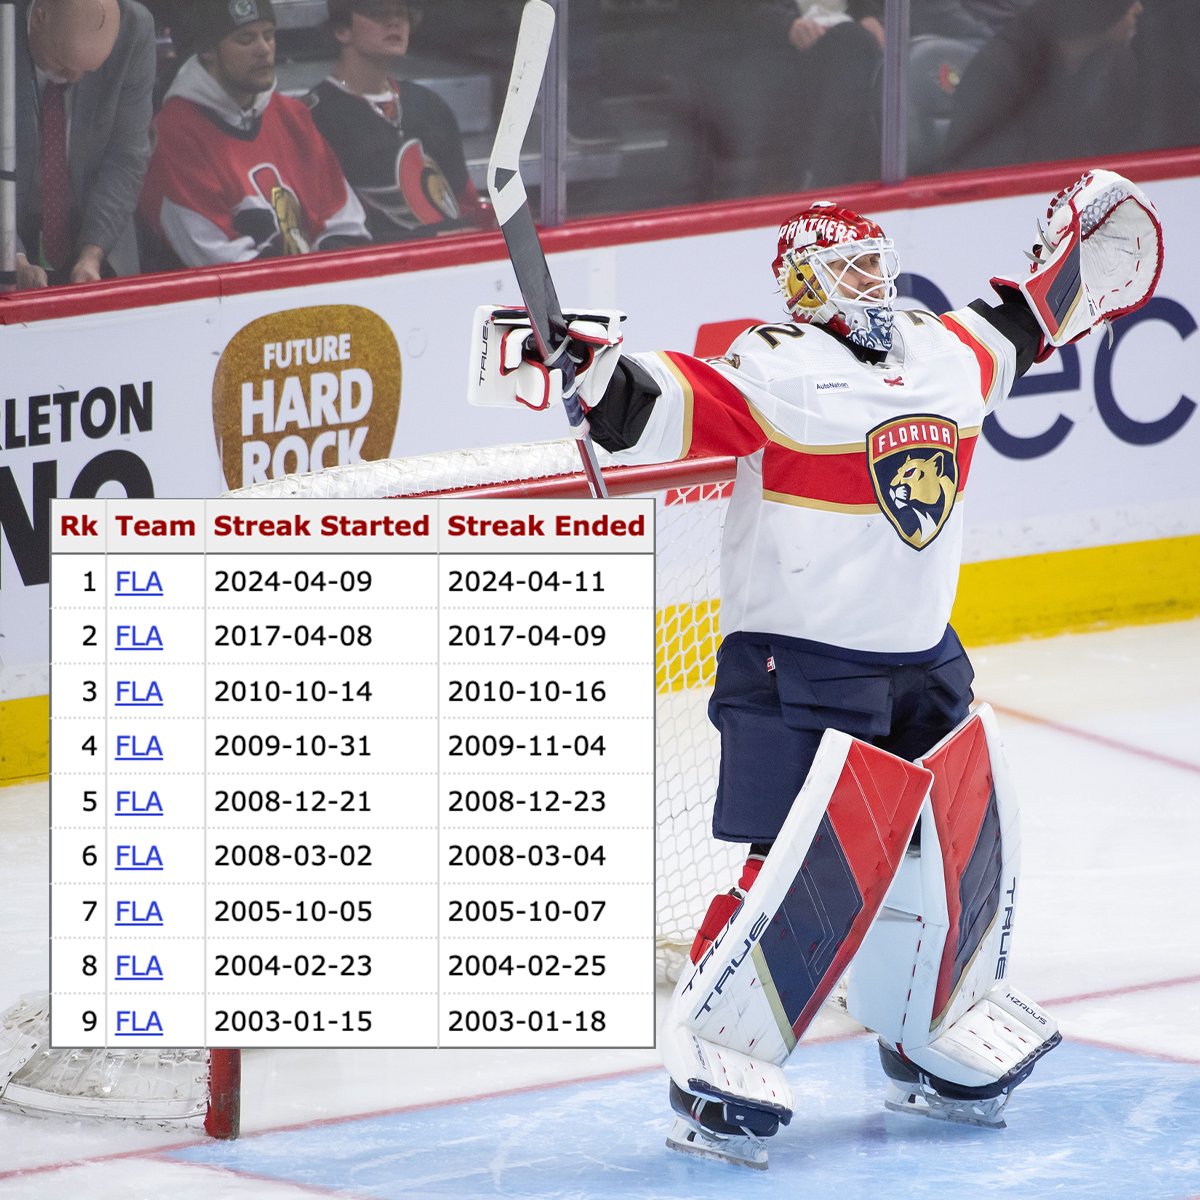 The @FlaPanthers have posted back-to-back shutouts for the first time since 2017. #NHL | #TimeToHunt